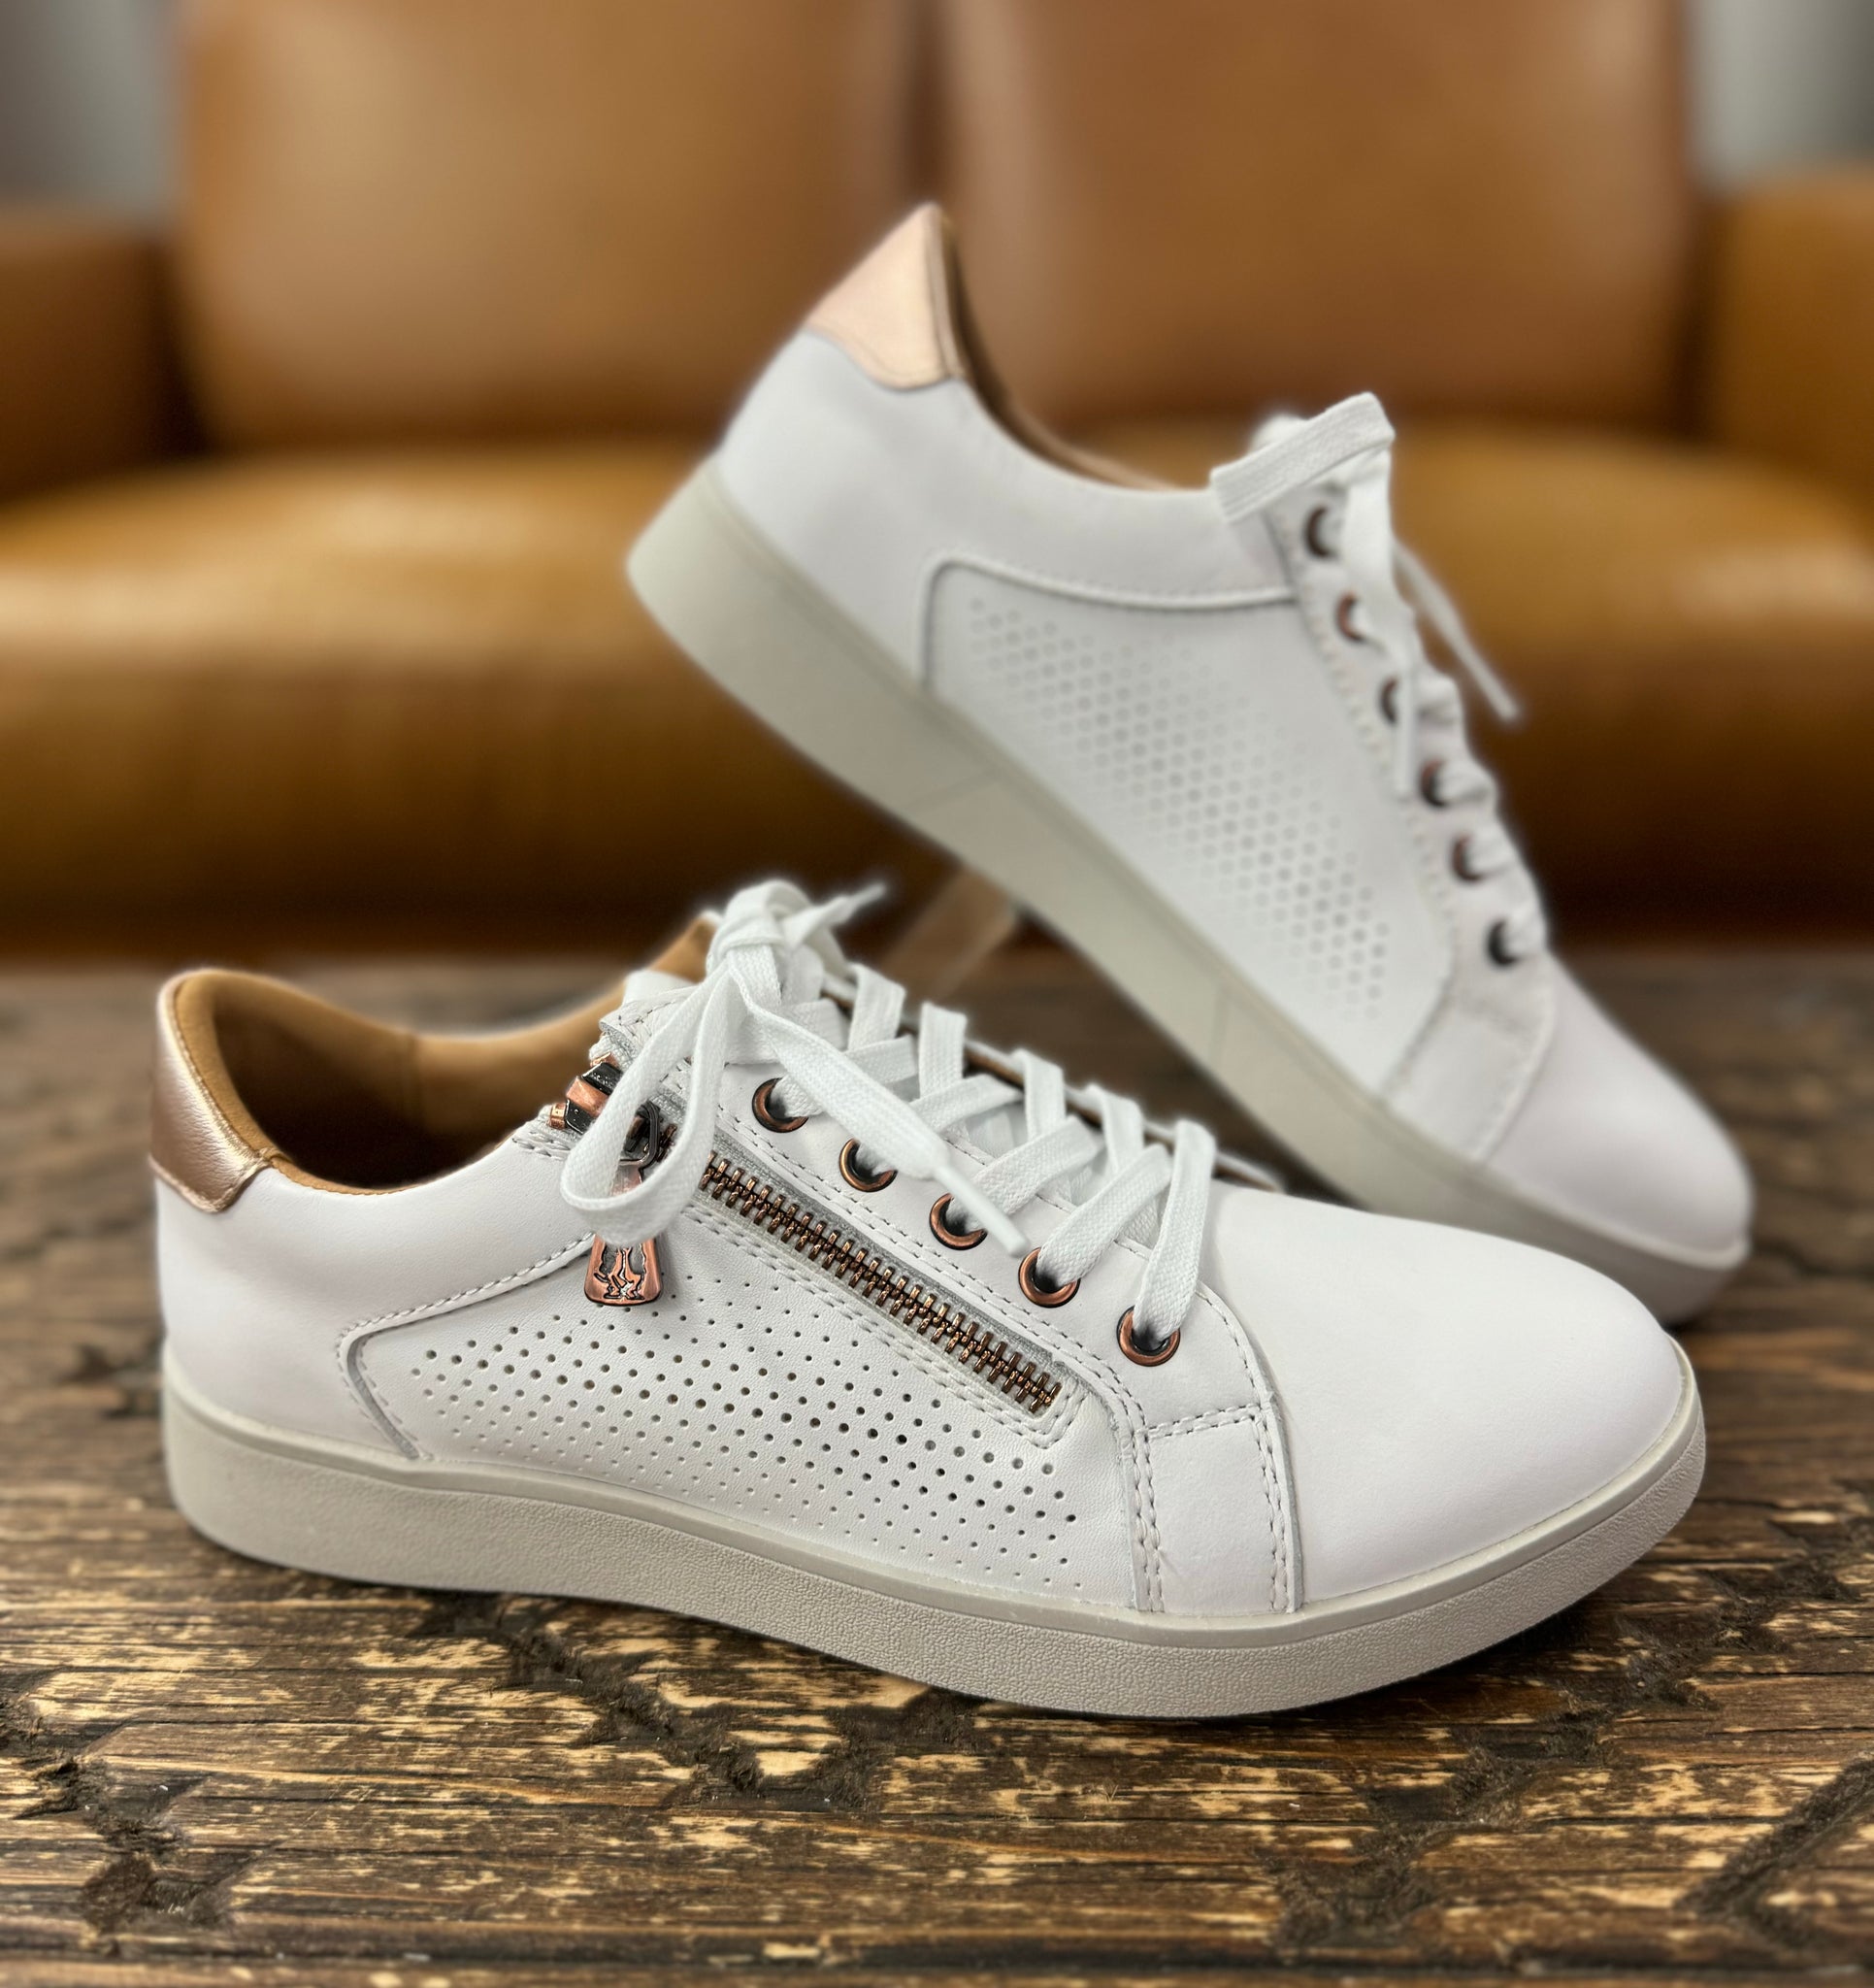 Hush Puppies Mimosa Perf White/Copper Sneaker